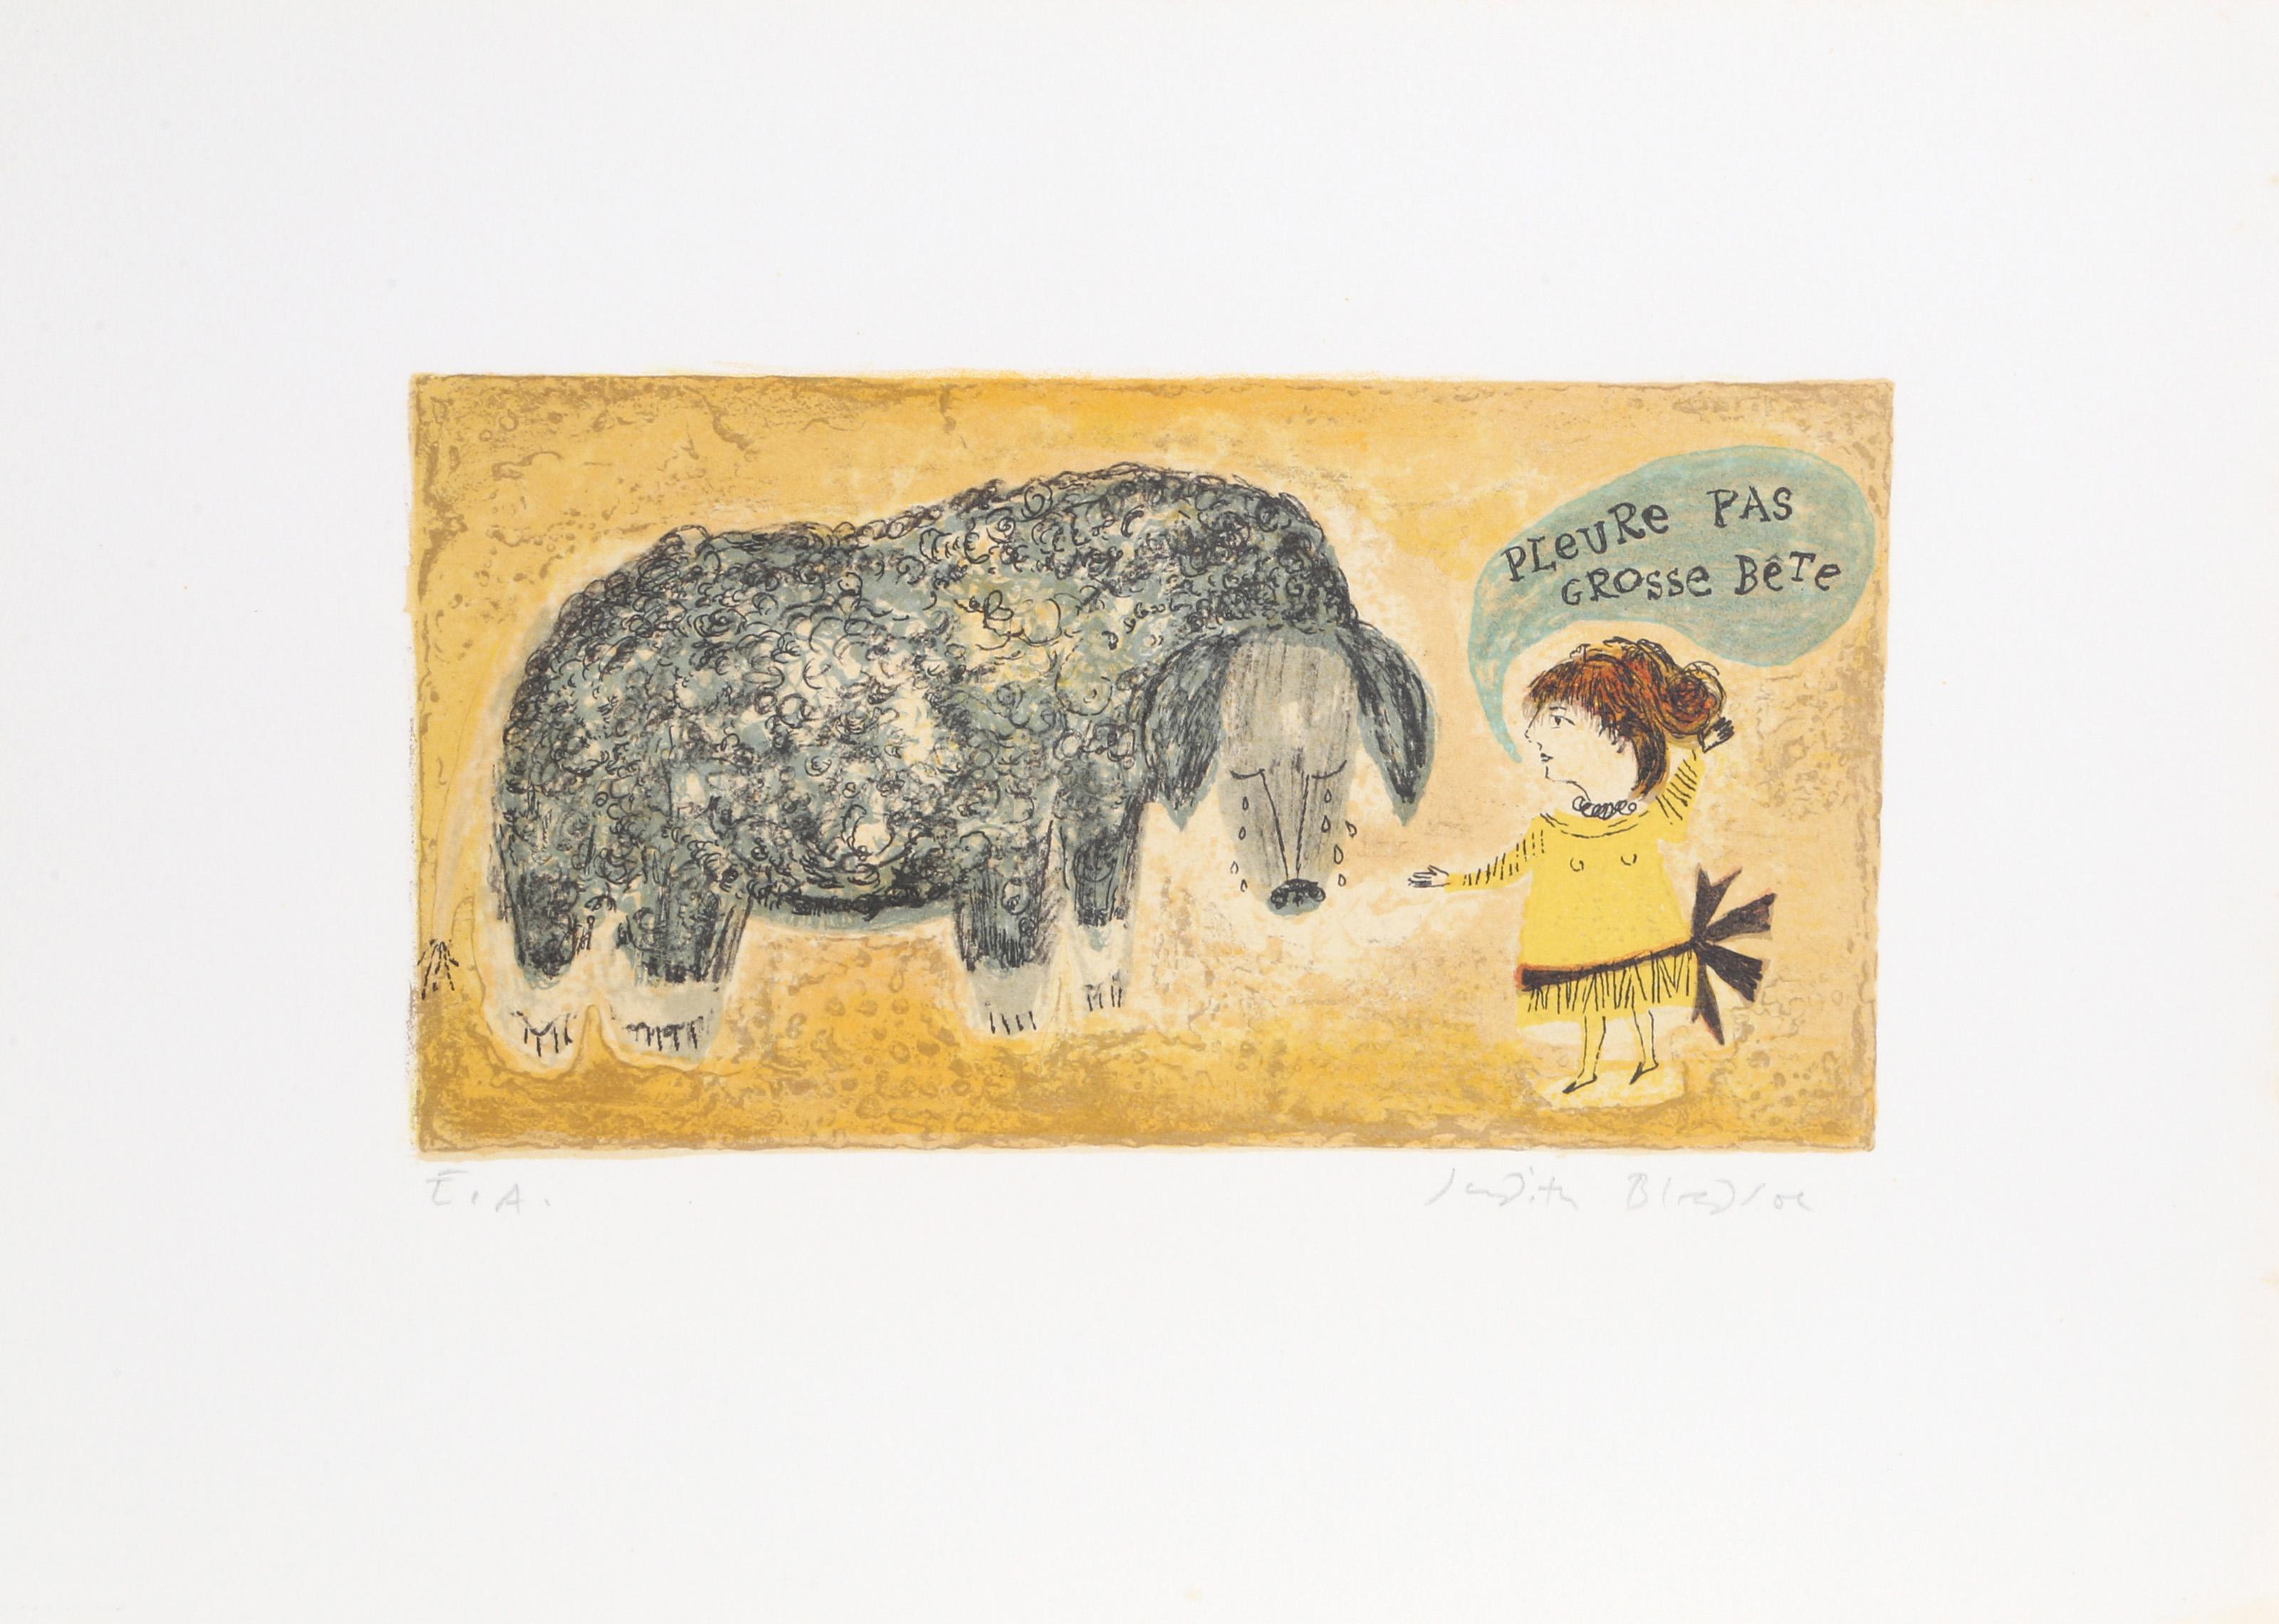 Judith Bledsoe, American (1938 - 2013) -  Pleure pas Grosse Bete - "Do Not Cry, Big Beast". Year: circa 1974, Medium: Lithograph, signed in pencil, Edition: EA, Image Size: 5 x 9 inches, Size: 10.5  x 14 in. (26.67  x 35.56 cm), Description: